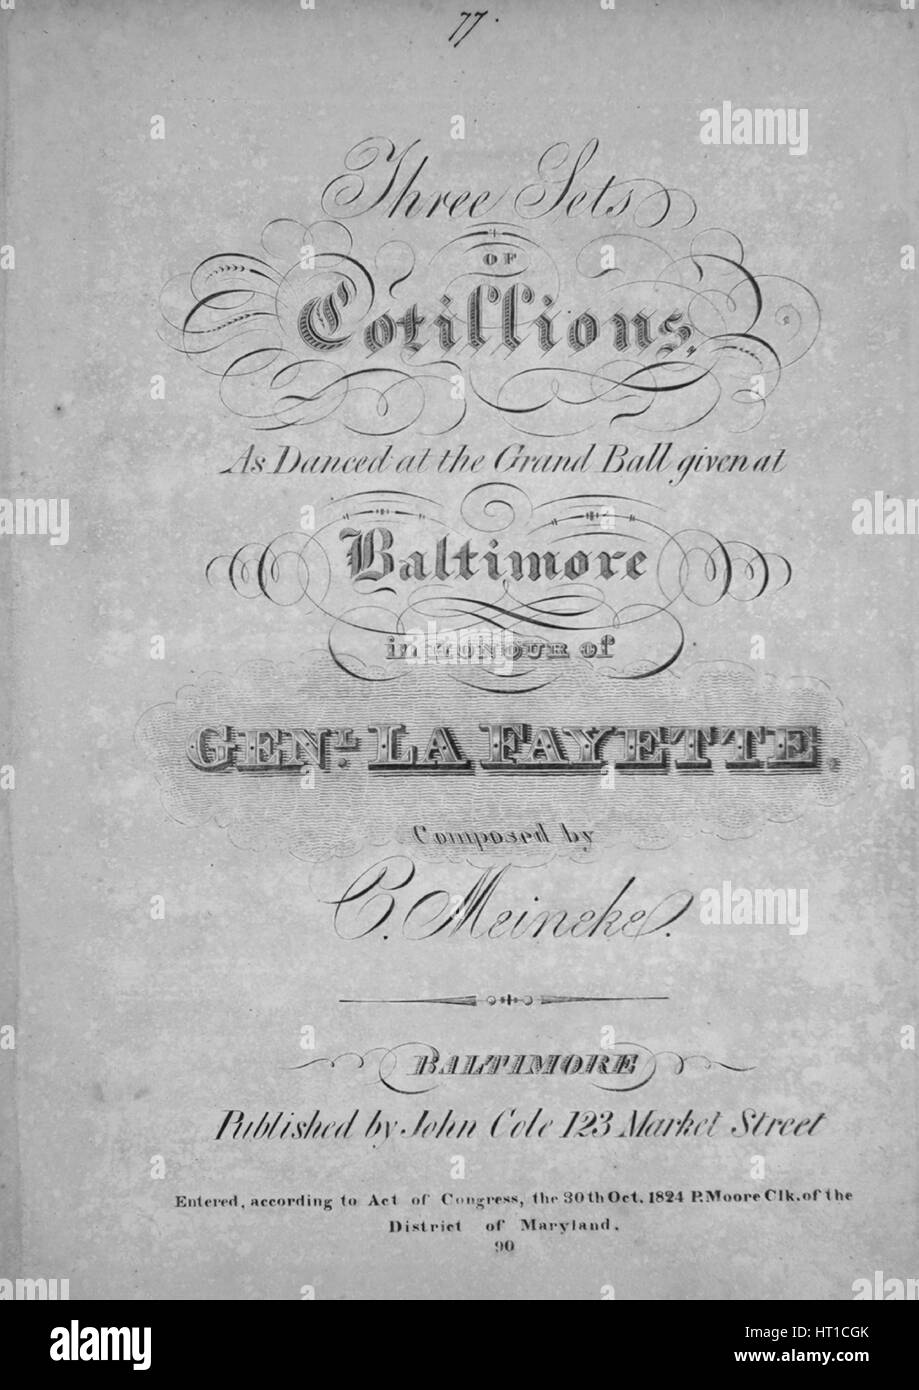 Sheet music cover image of the song 'Three Sets of Cotillions (1) The Welcome; (2) La Fayette's Favourite; (3) The Cadmus; (4) La Bonne Mere Second Set  (1) Carrolton; (2) The Nationsl  Guest; (3) York Town; (4) Washingtons Tent Third Set  (1) Belvidere; (2) The  Noble Volunteer; (3) The Marquis; (4) The General Also includes  Colu', with original authorship notes reading 'Composed by C Meineke', United States, 1824. The publisher is listed as 'John Cole, 123 Market Street', the form of composition is 'da capo', the instrumentation is 'piano and voice', the first line reads 'None', and the ill Stock Photo